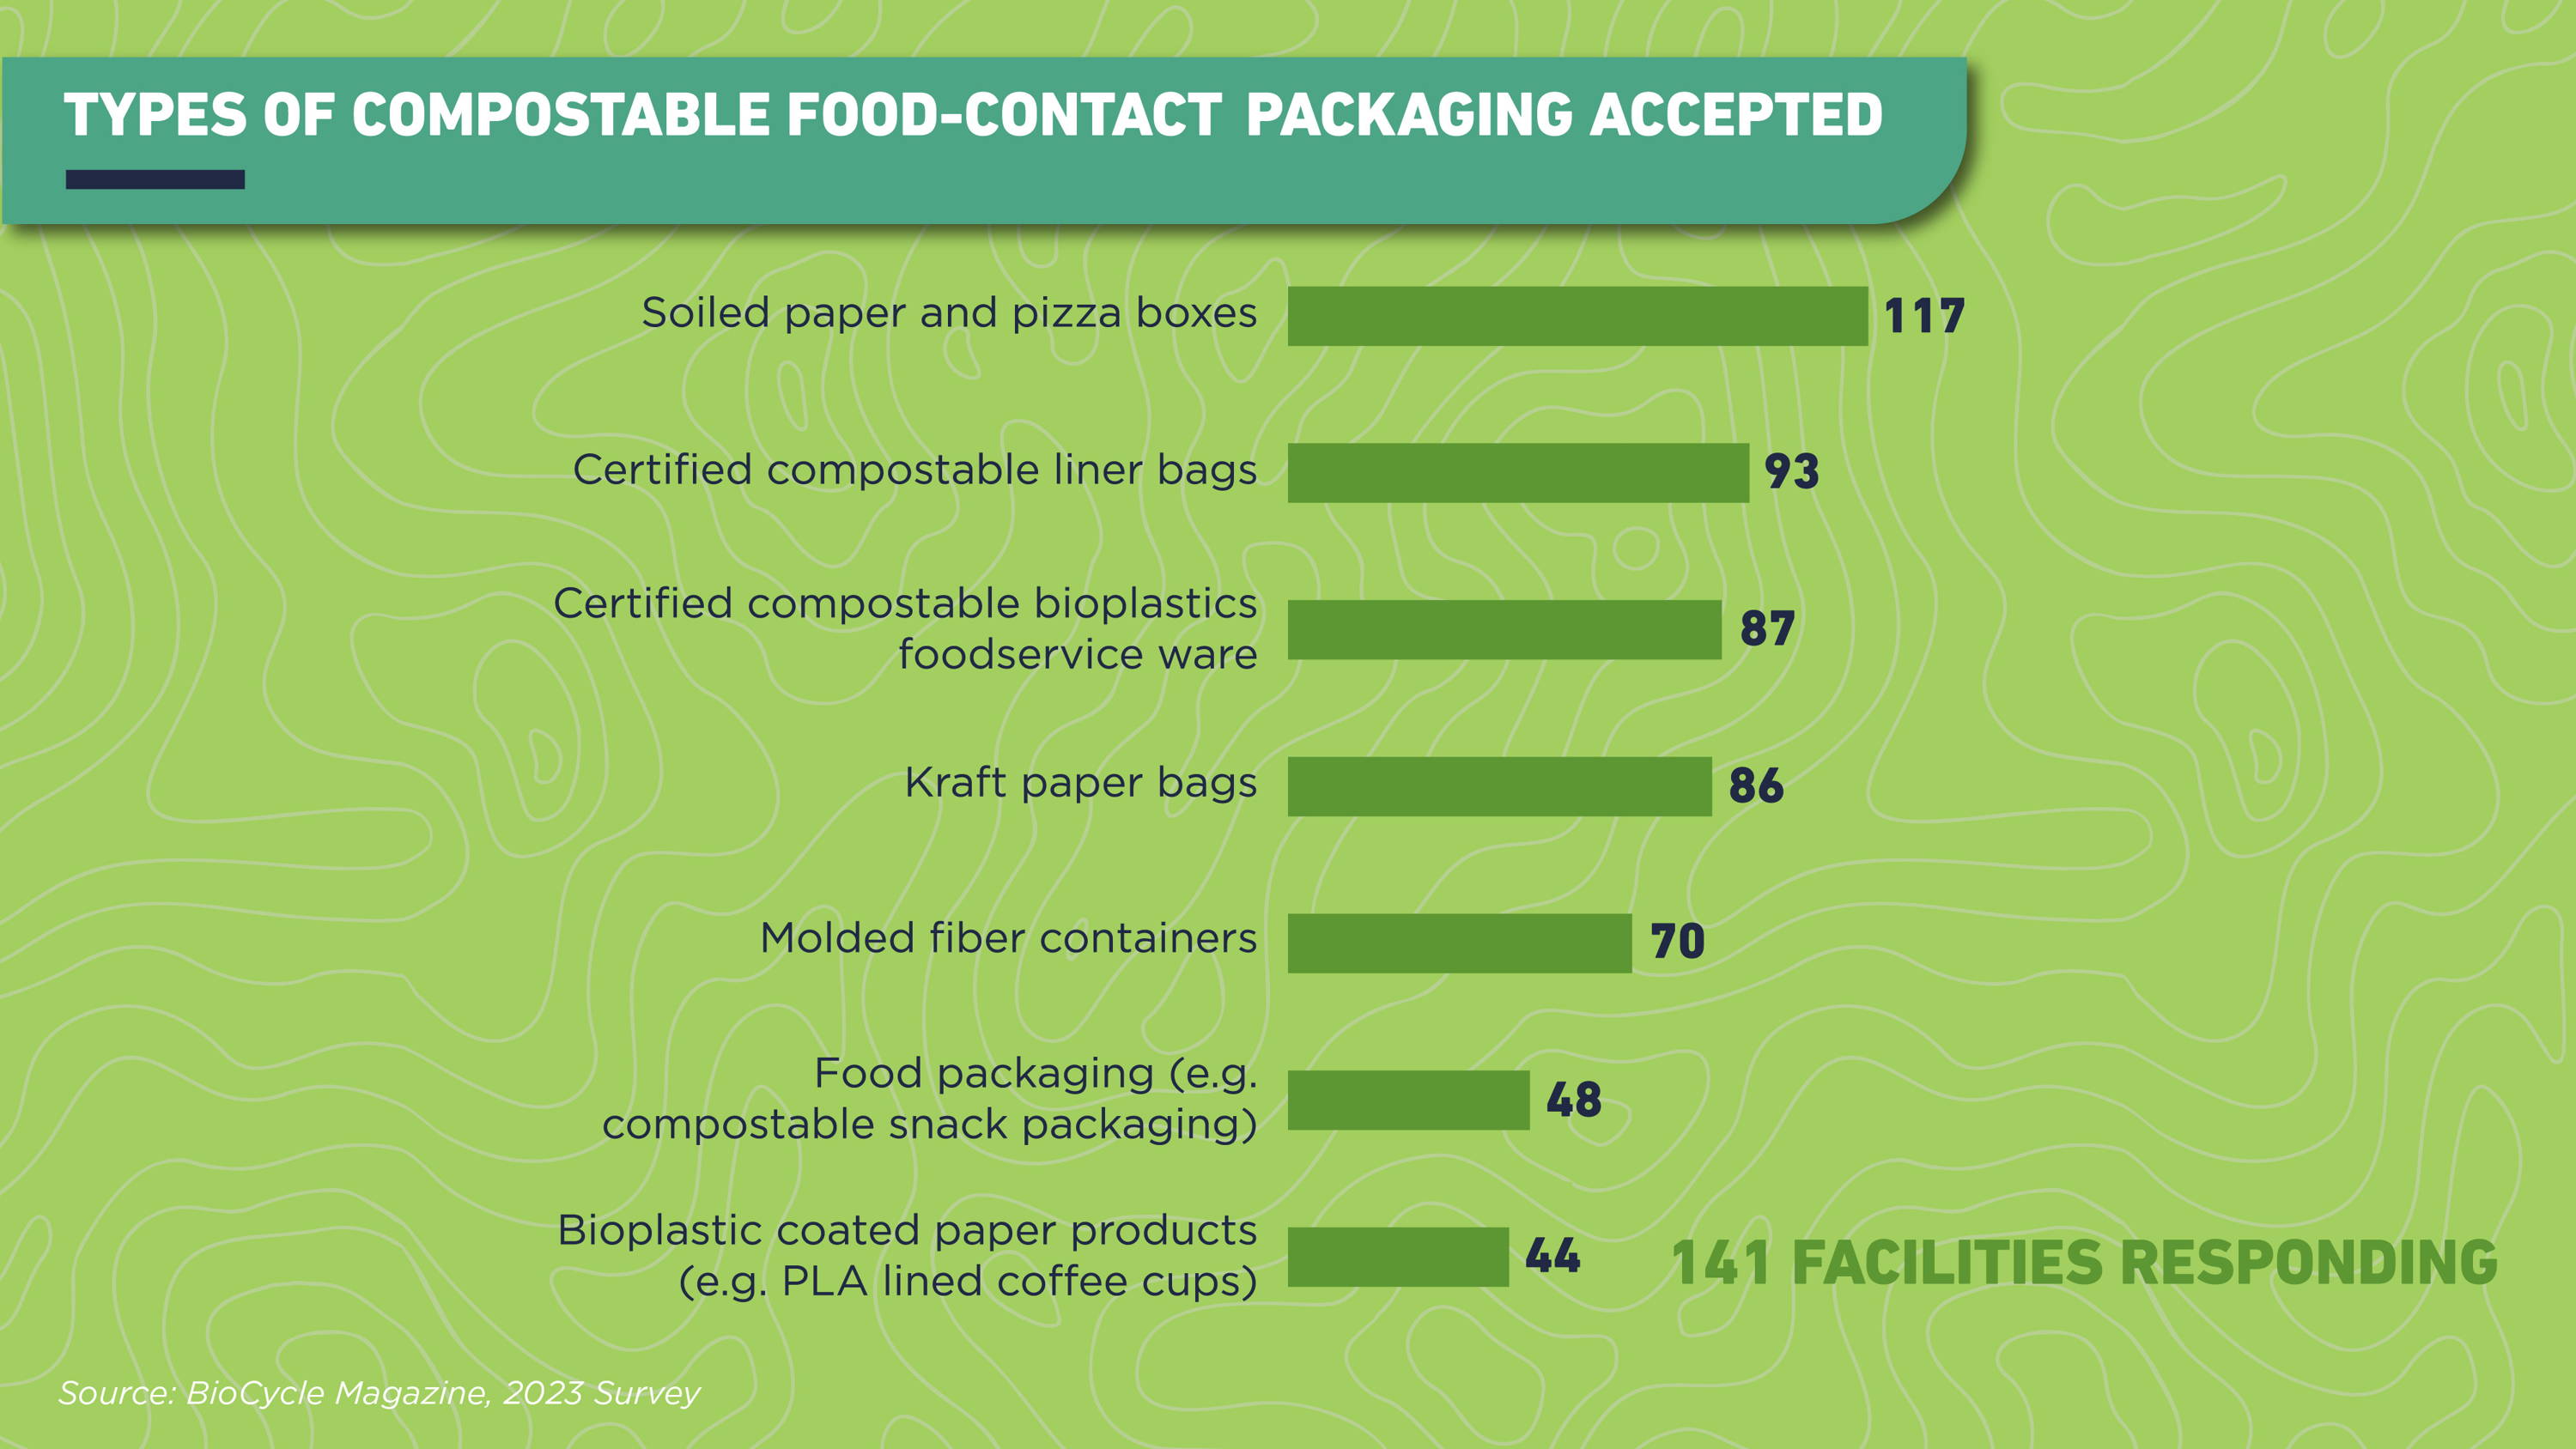 Chart showing soiled paper and pizza boxes are the most commonly accepted foodservice packaging items, following by can liners